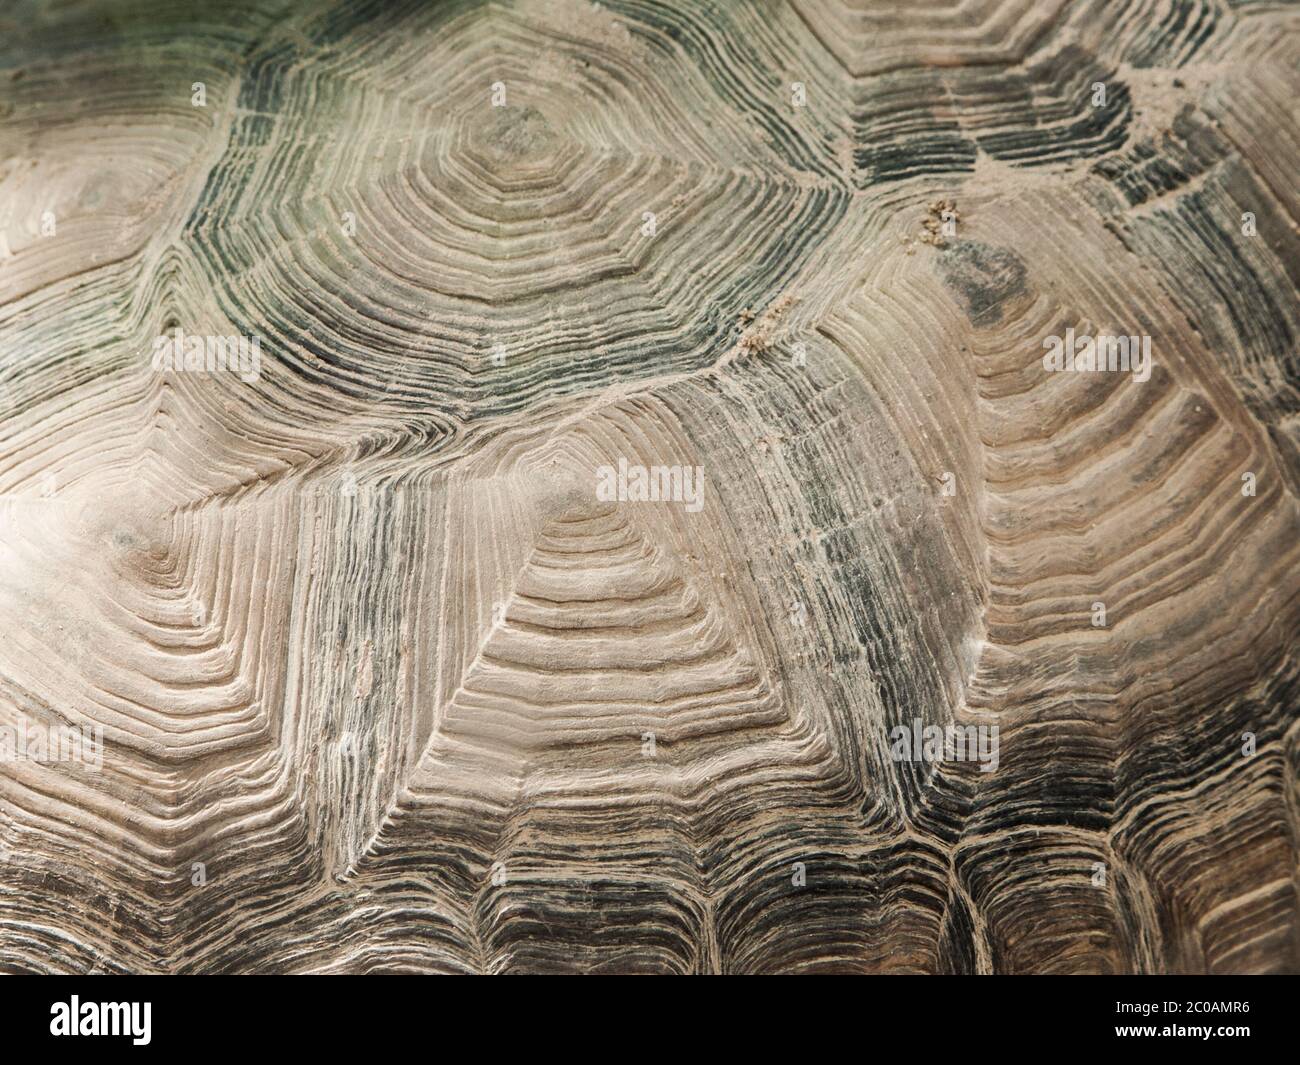 Turtle shell close-up texture. Abystract natural shapes. Stock Photo